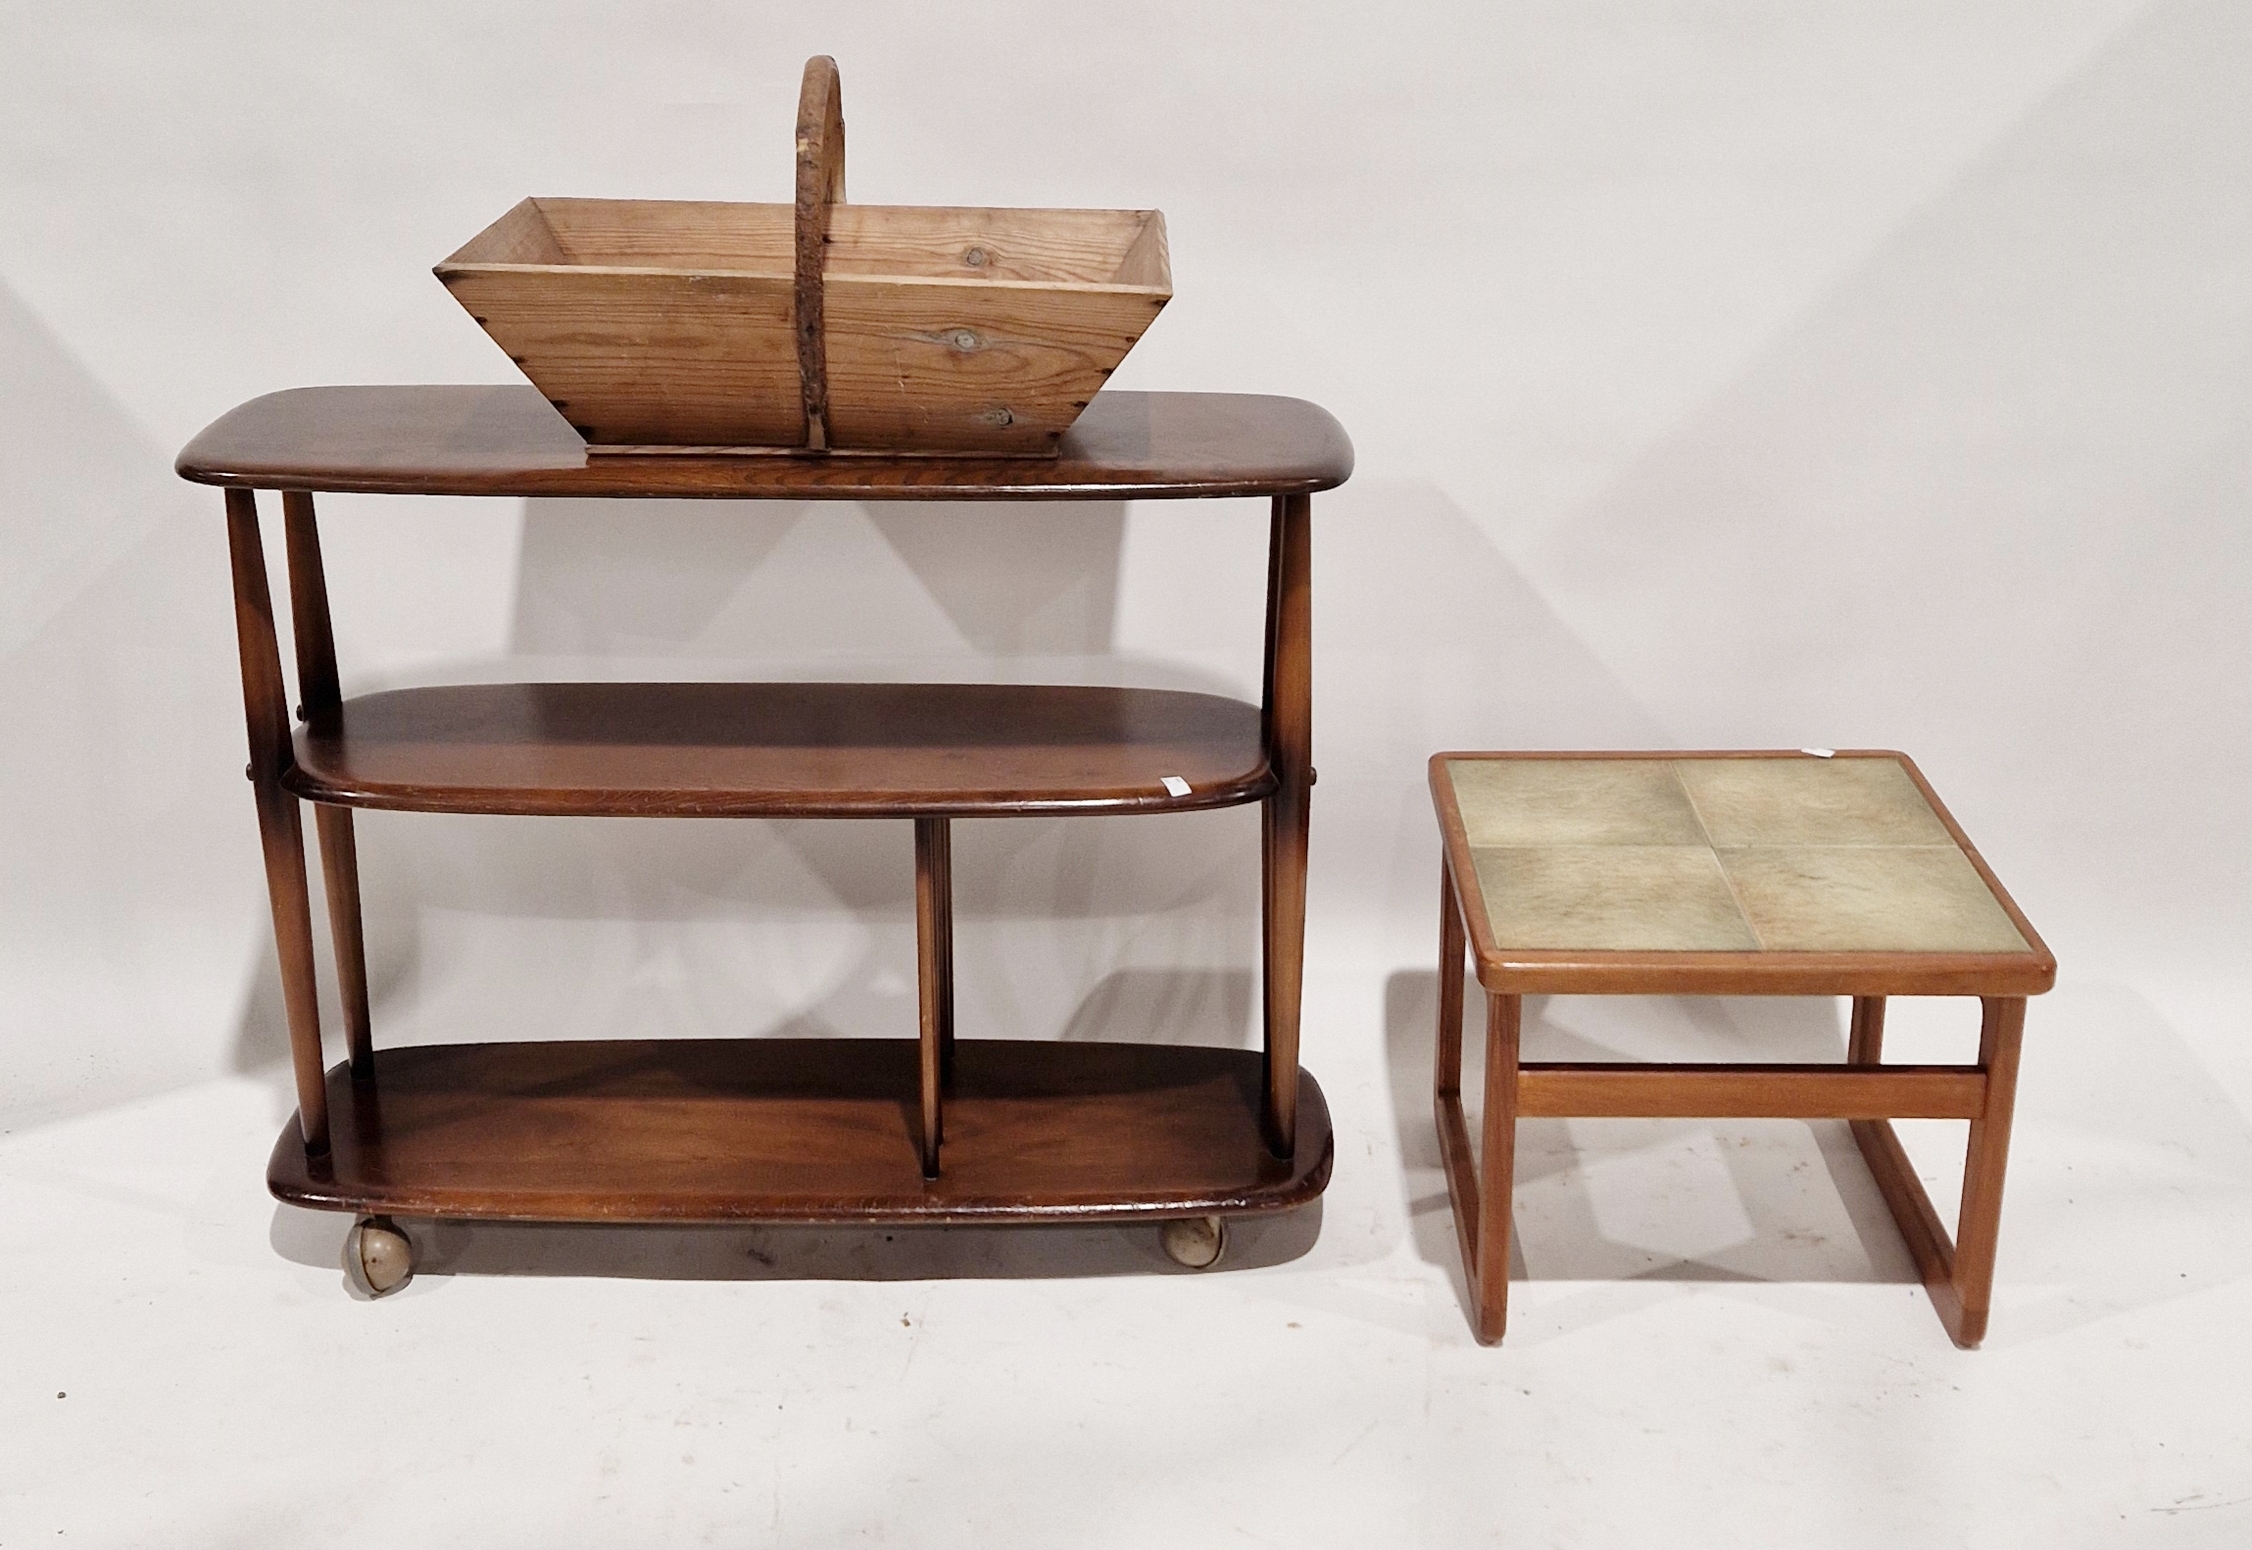 20th century Ercol three-tier occasional table on castors, 91cm wide, a tile-top coffee table and - Image 2 of 2